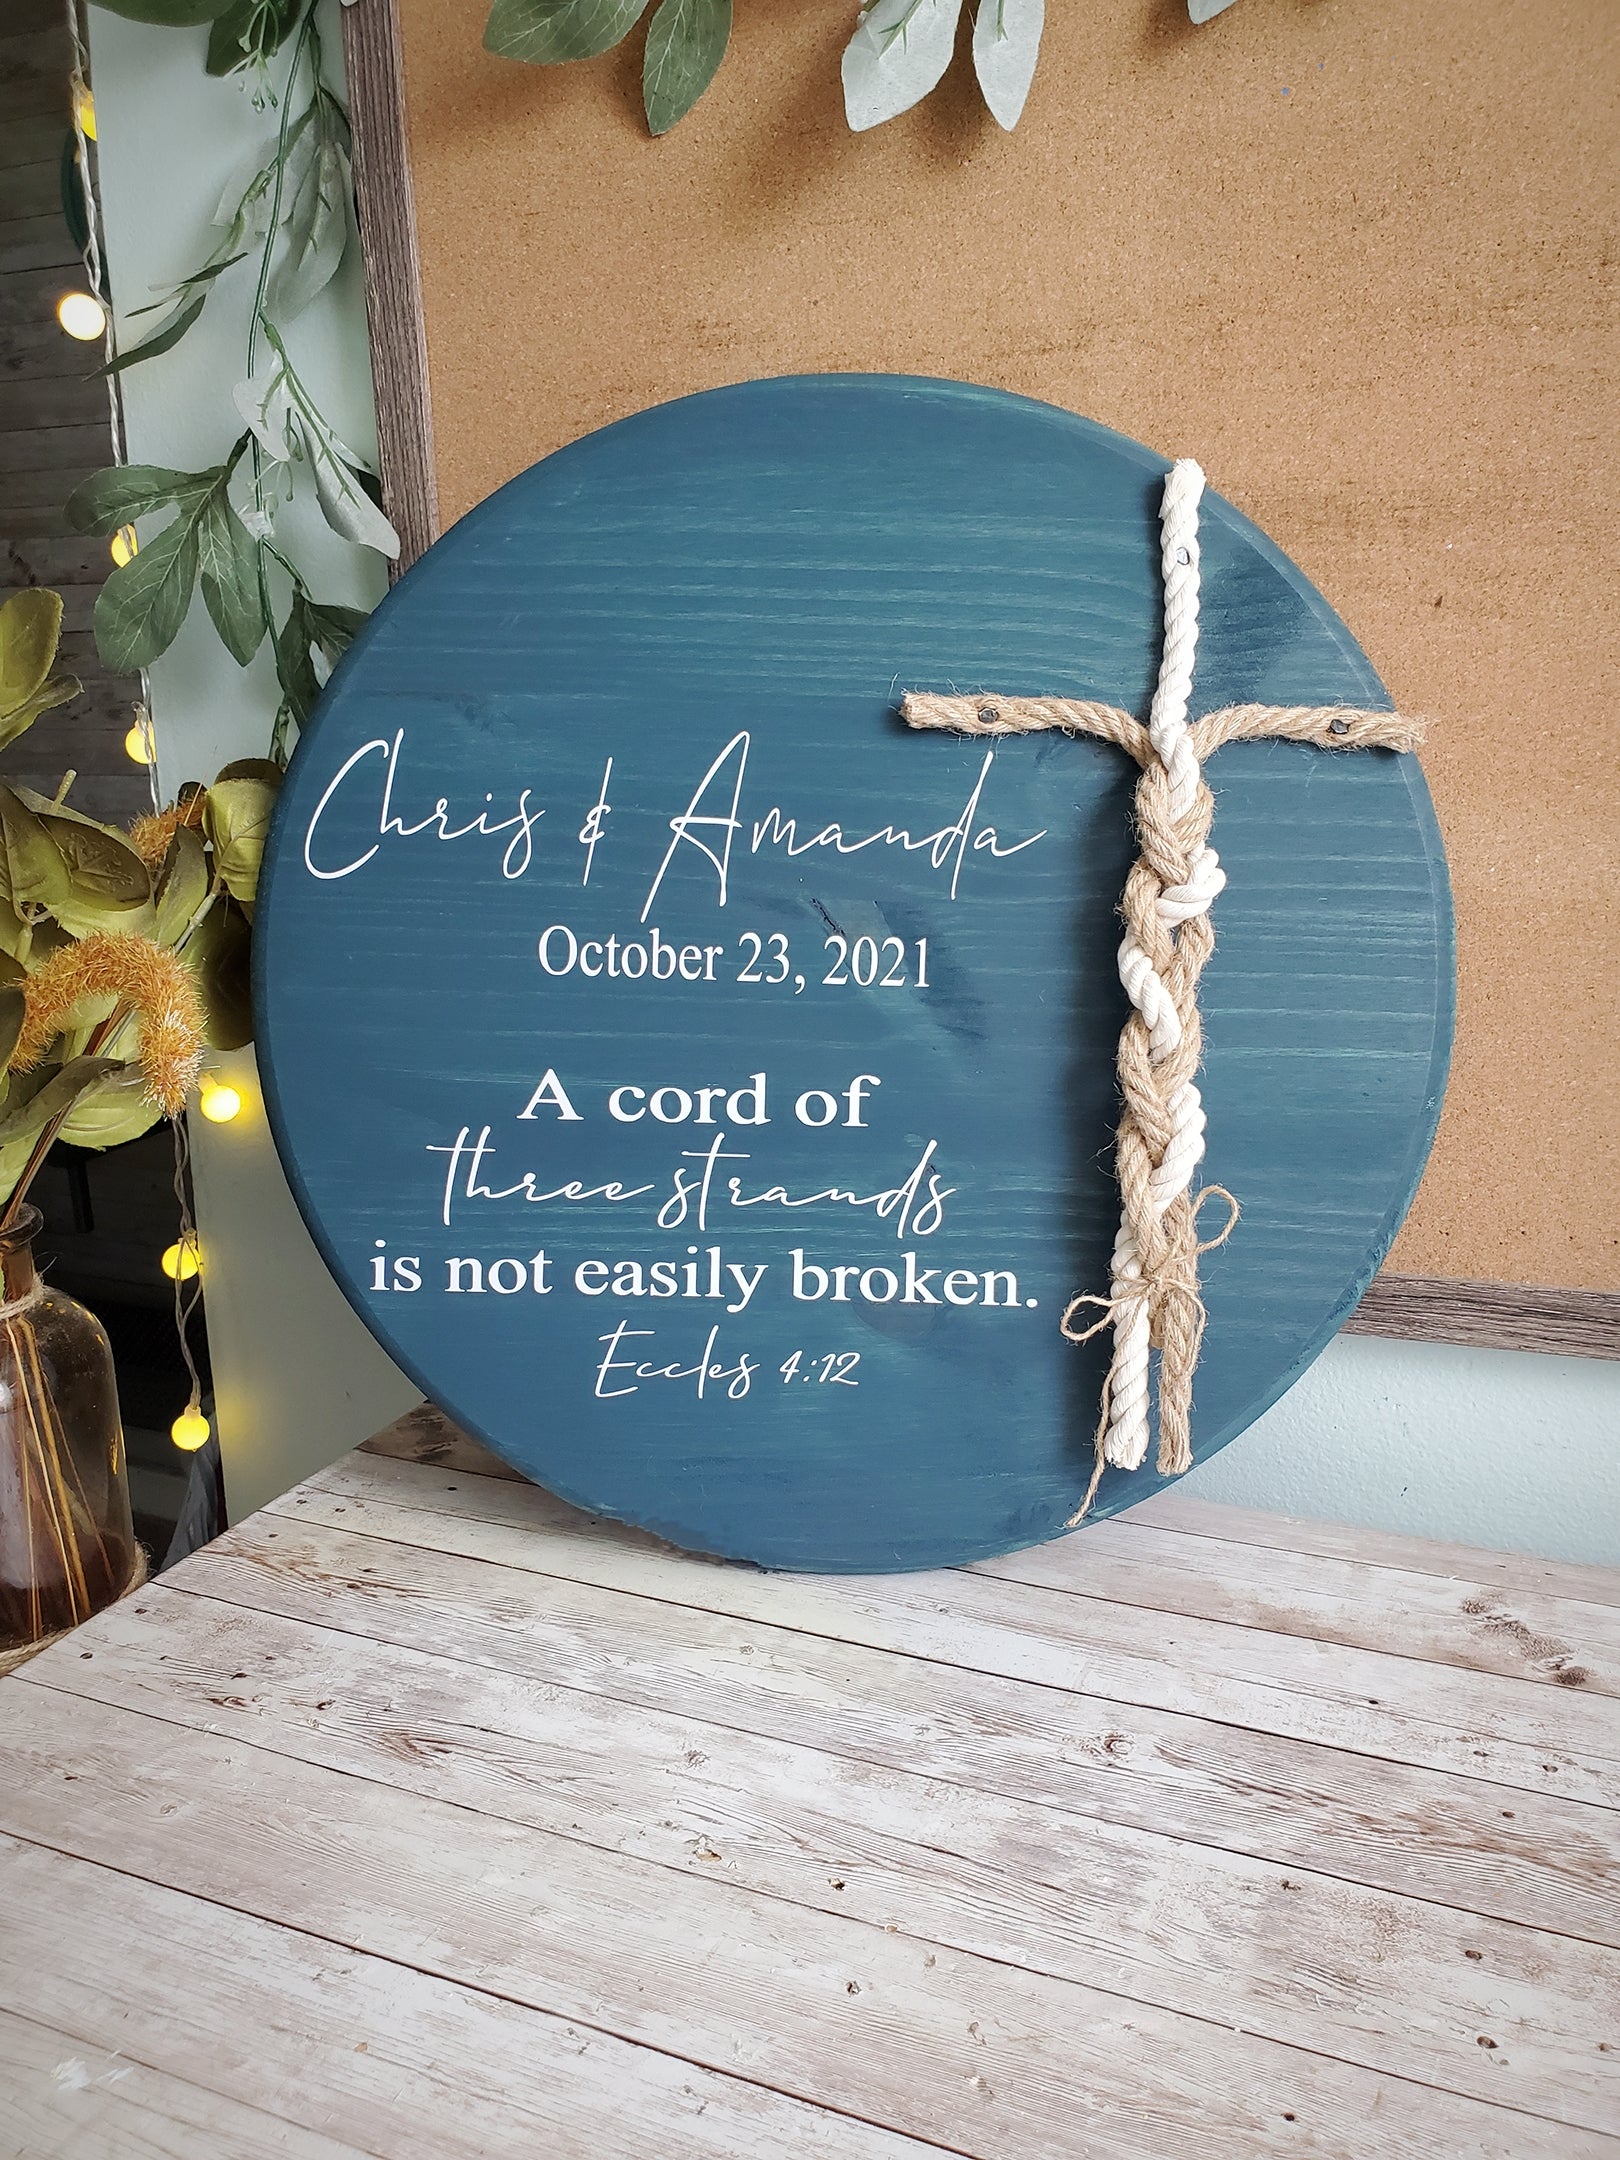 Beach themed Wedding Sign, Round Unity Sign, A Cord of Three Strands Is Not Easily Broken, Beach Wedding, 3 cords wedding, Blue/Green